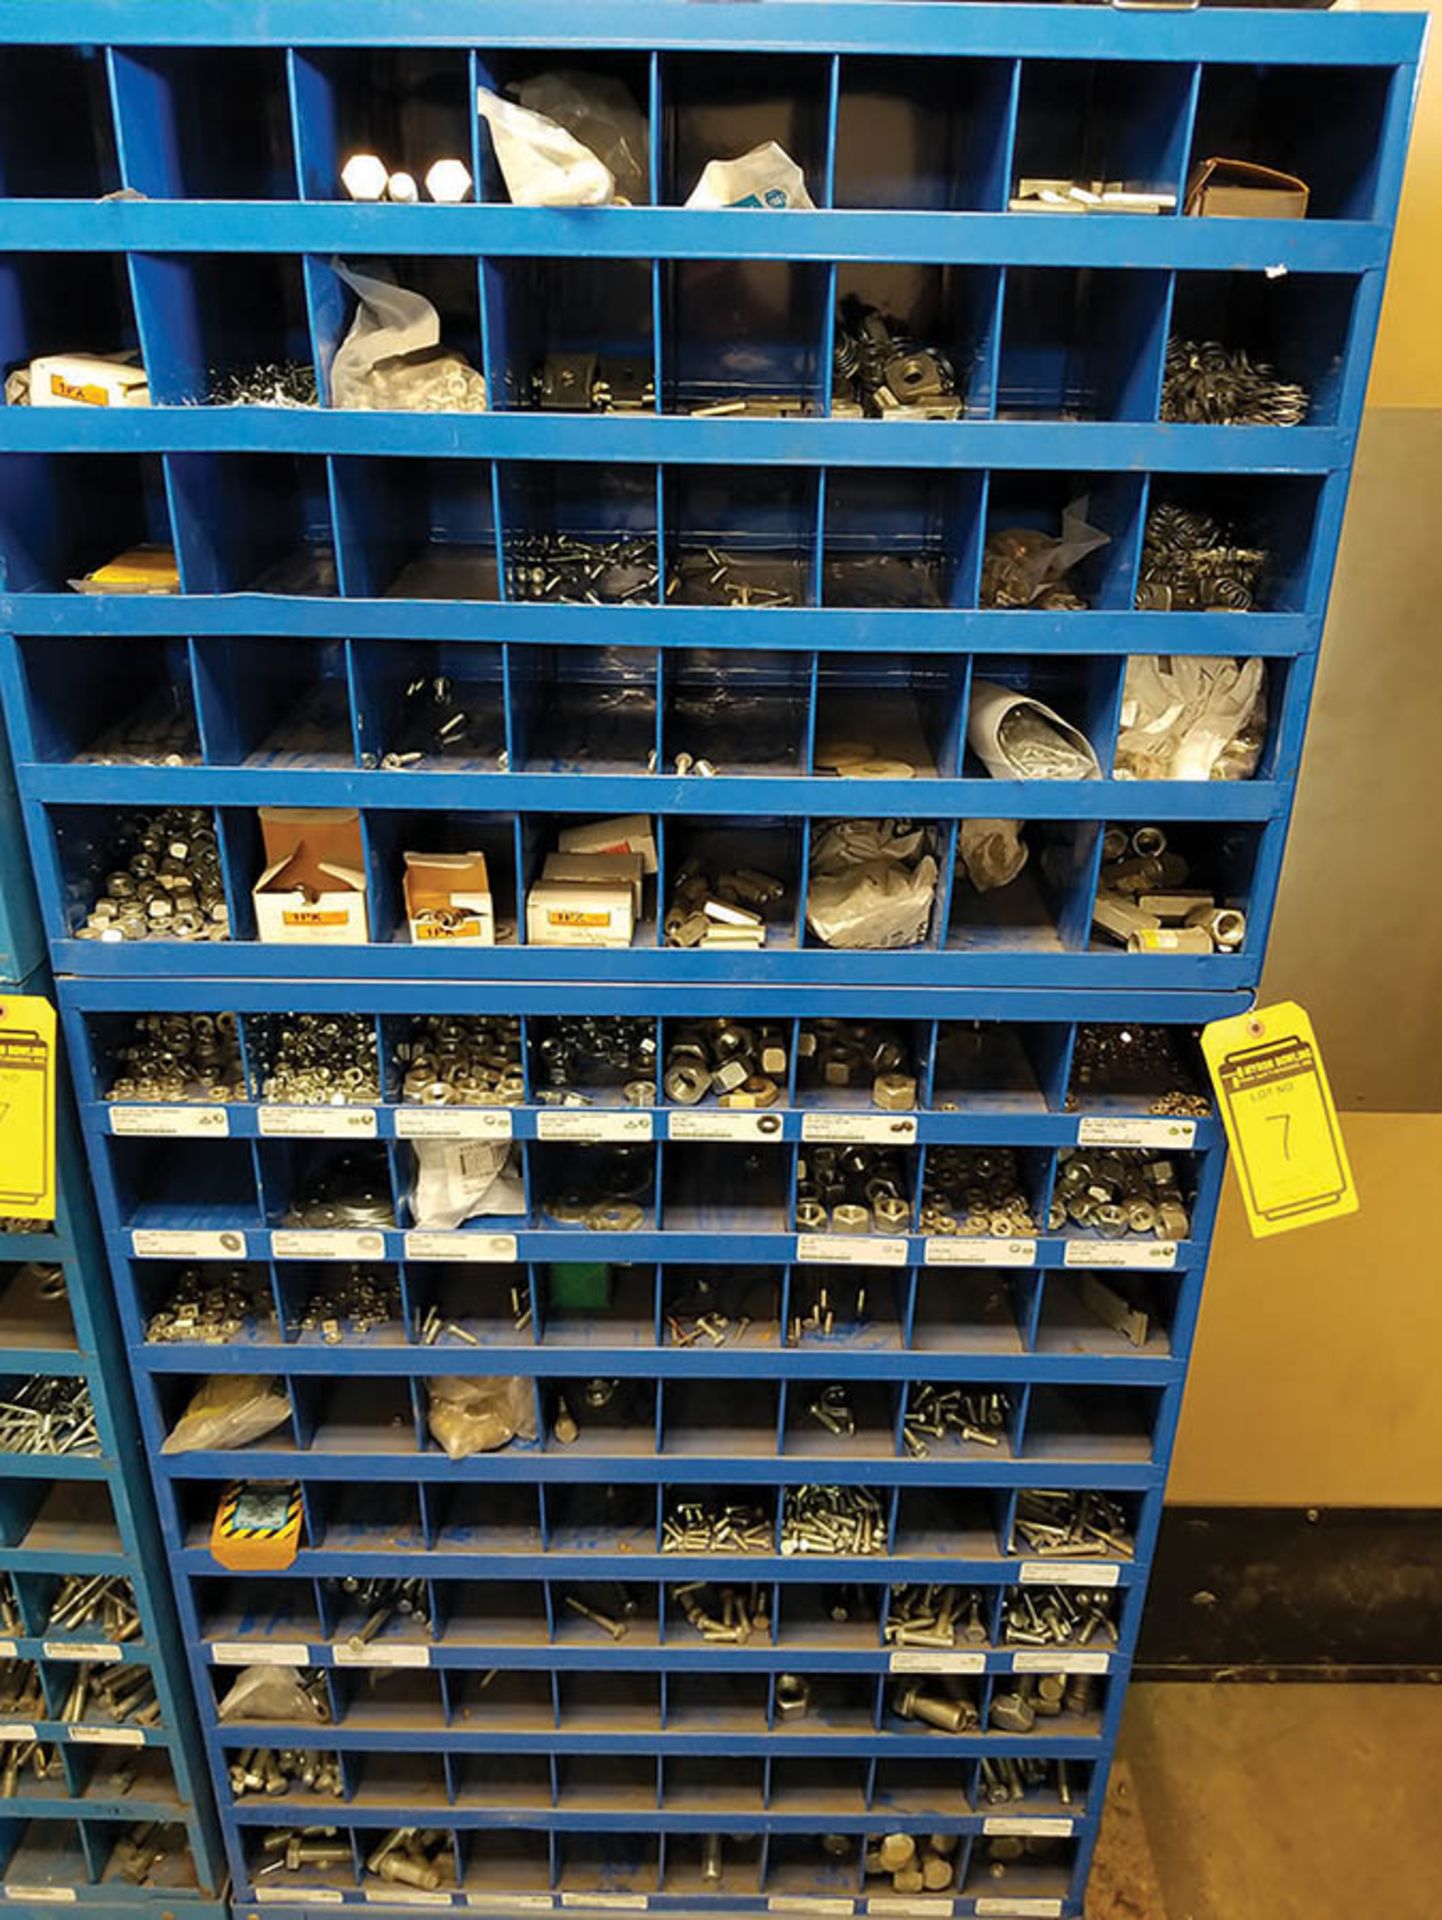 (2) FASTENAL HARDWARE BIN CABINETS WITH BOLTS, NUTS, SPRINGS, AND EDGE ANCHORS - Image 3 of 4